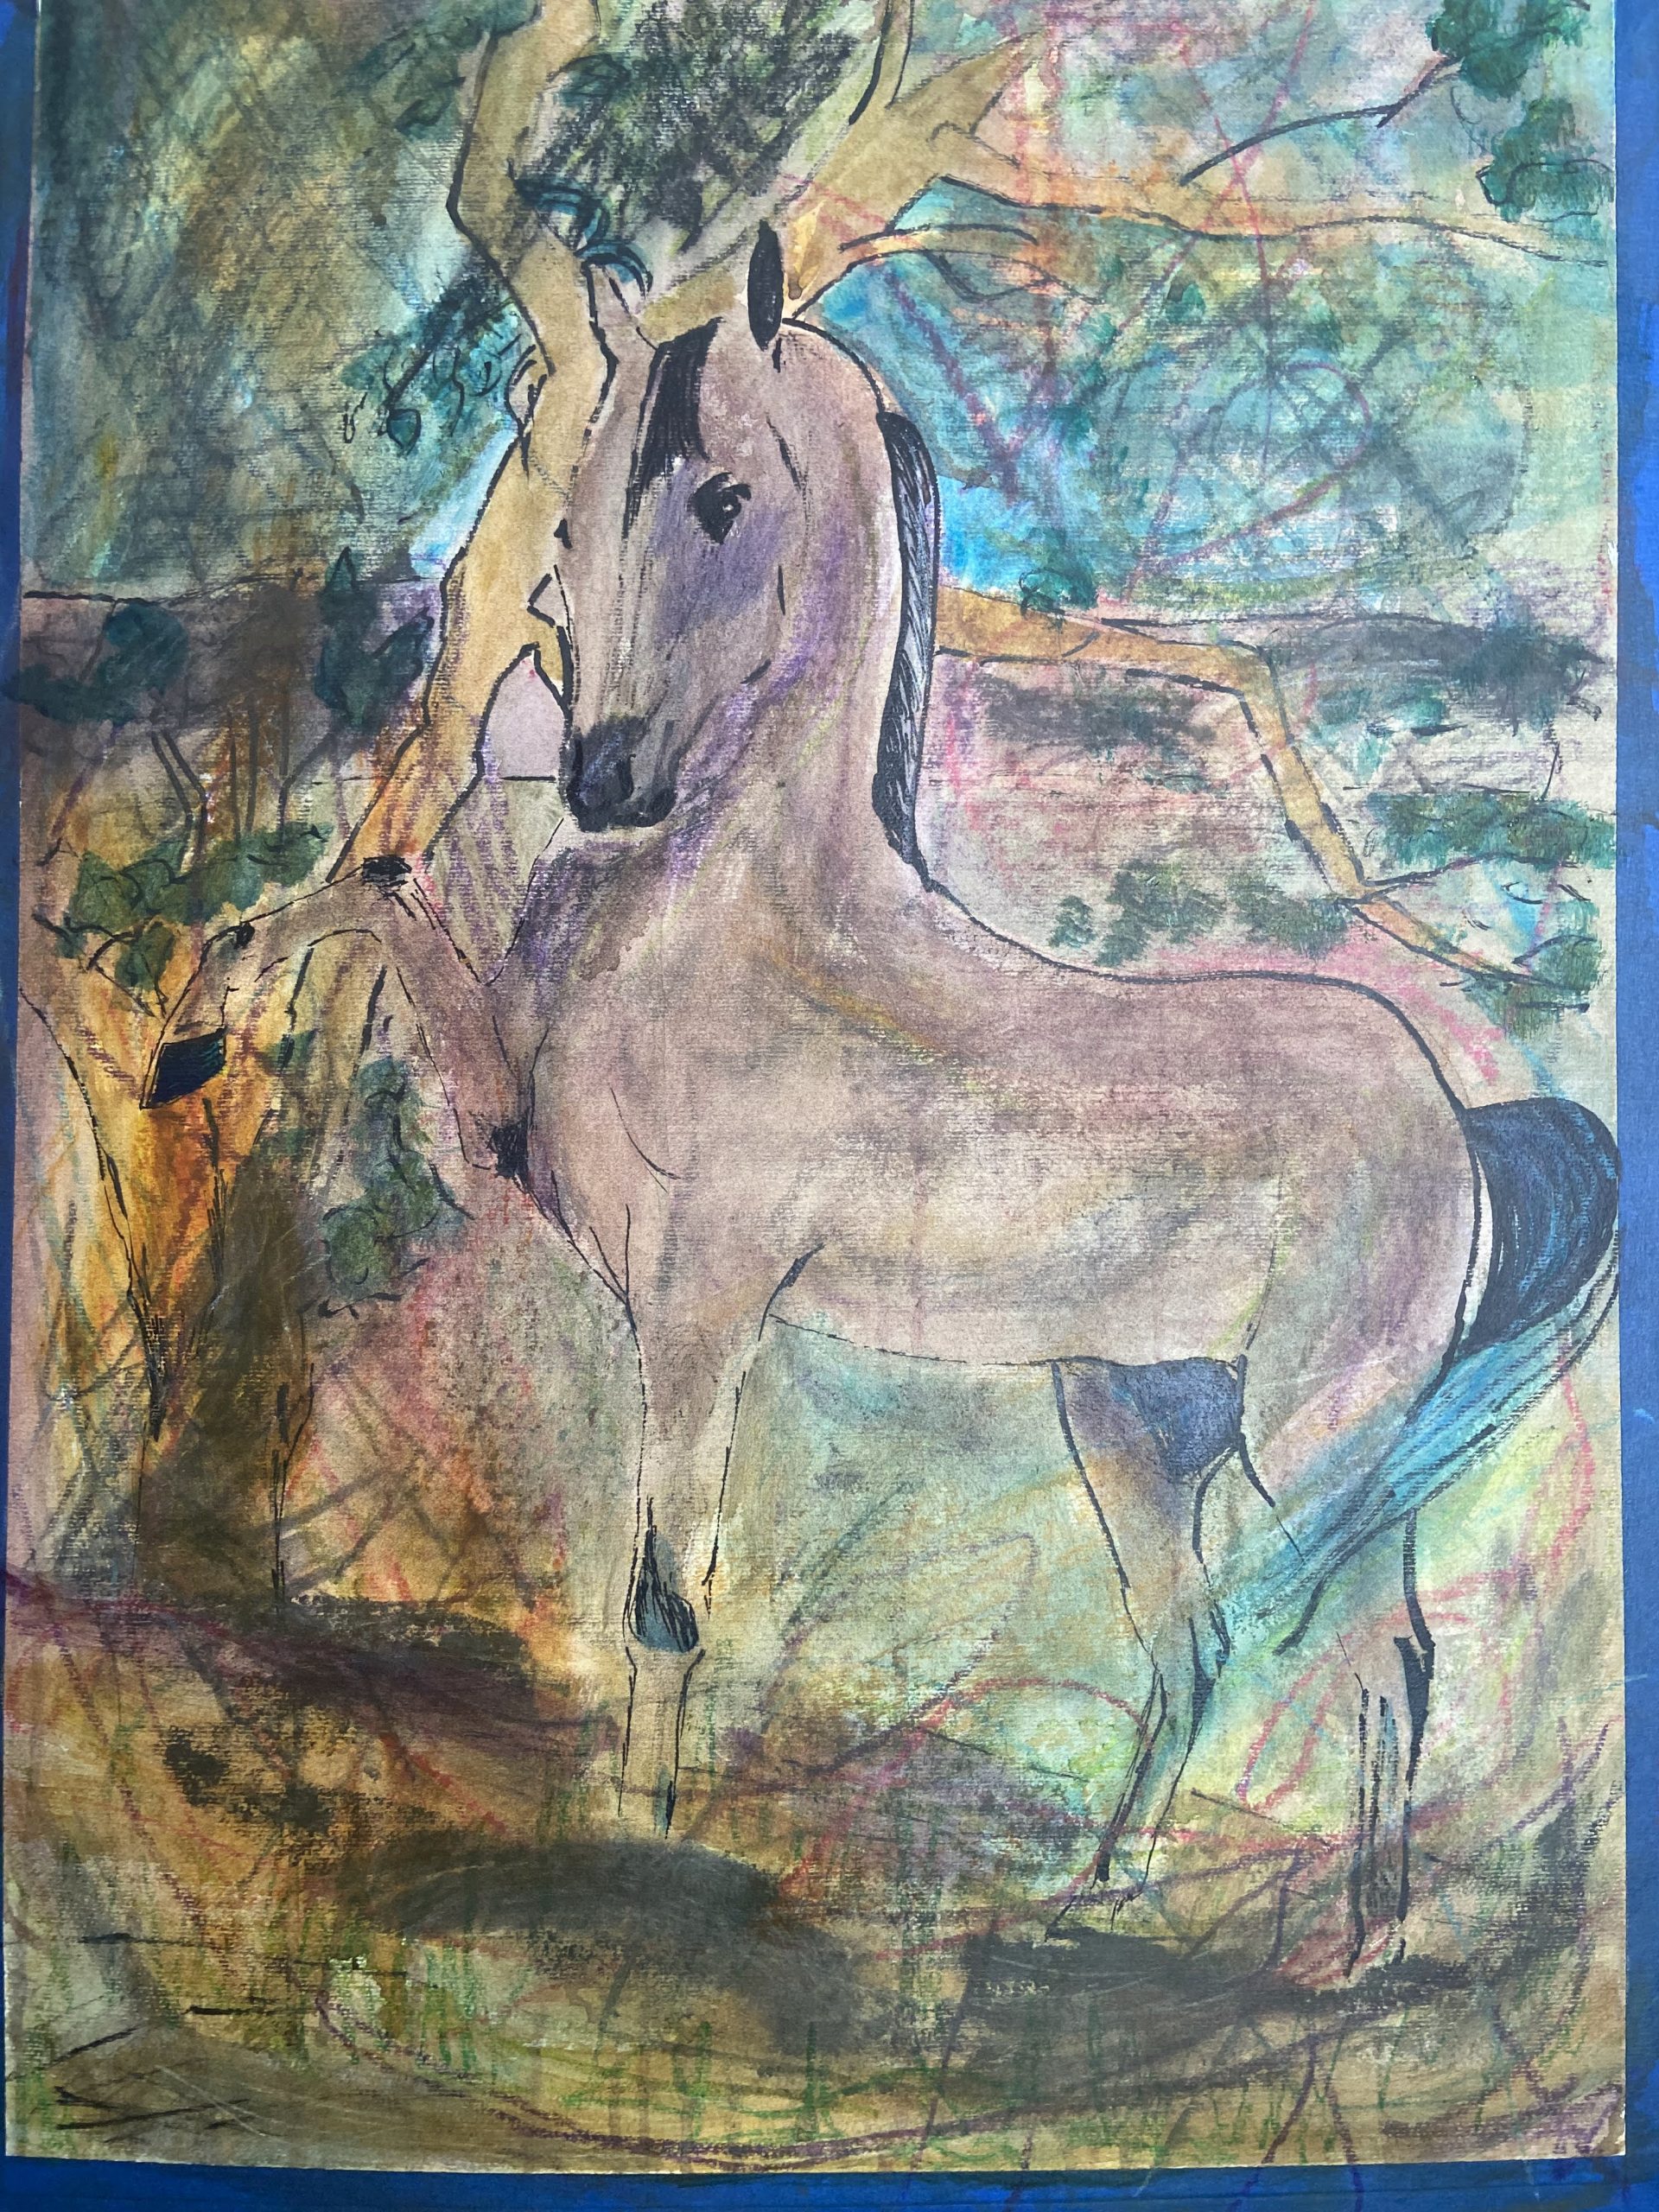 Second layer of the painting of a horse using acrylic glazes